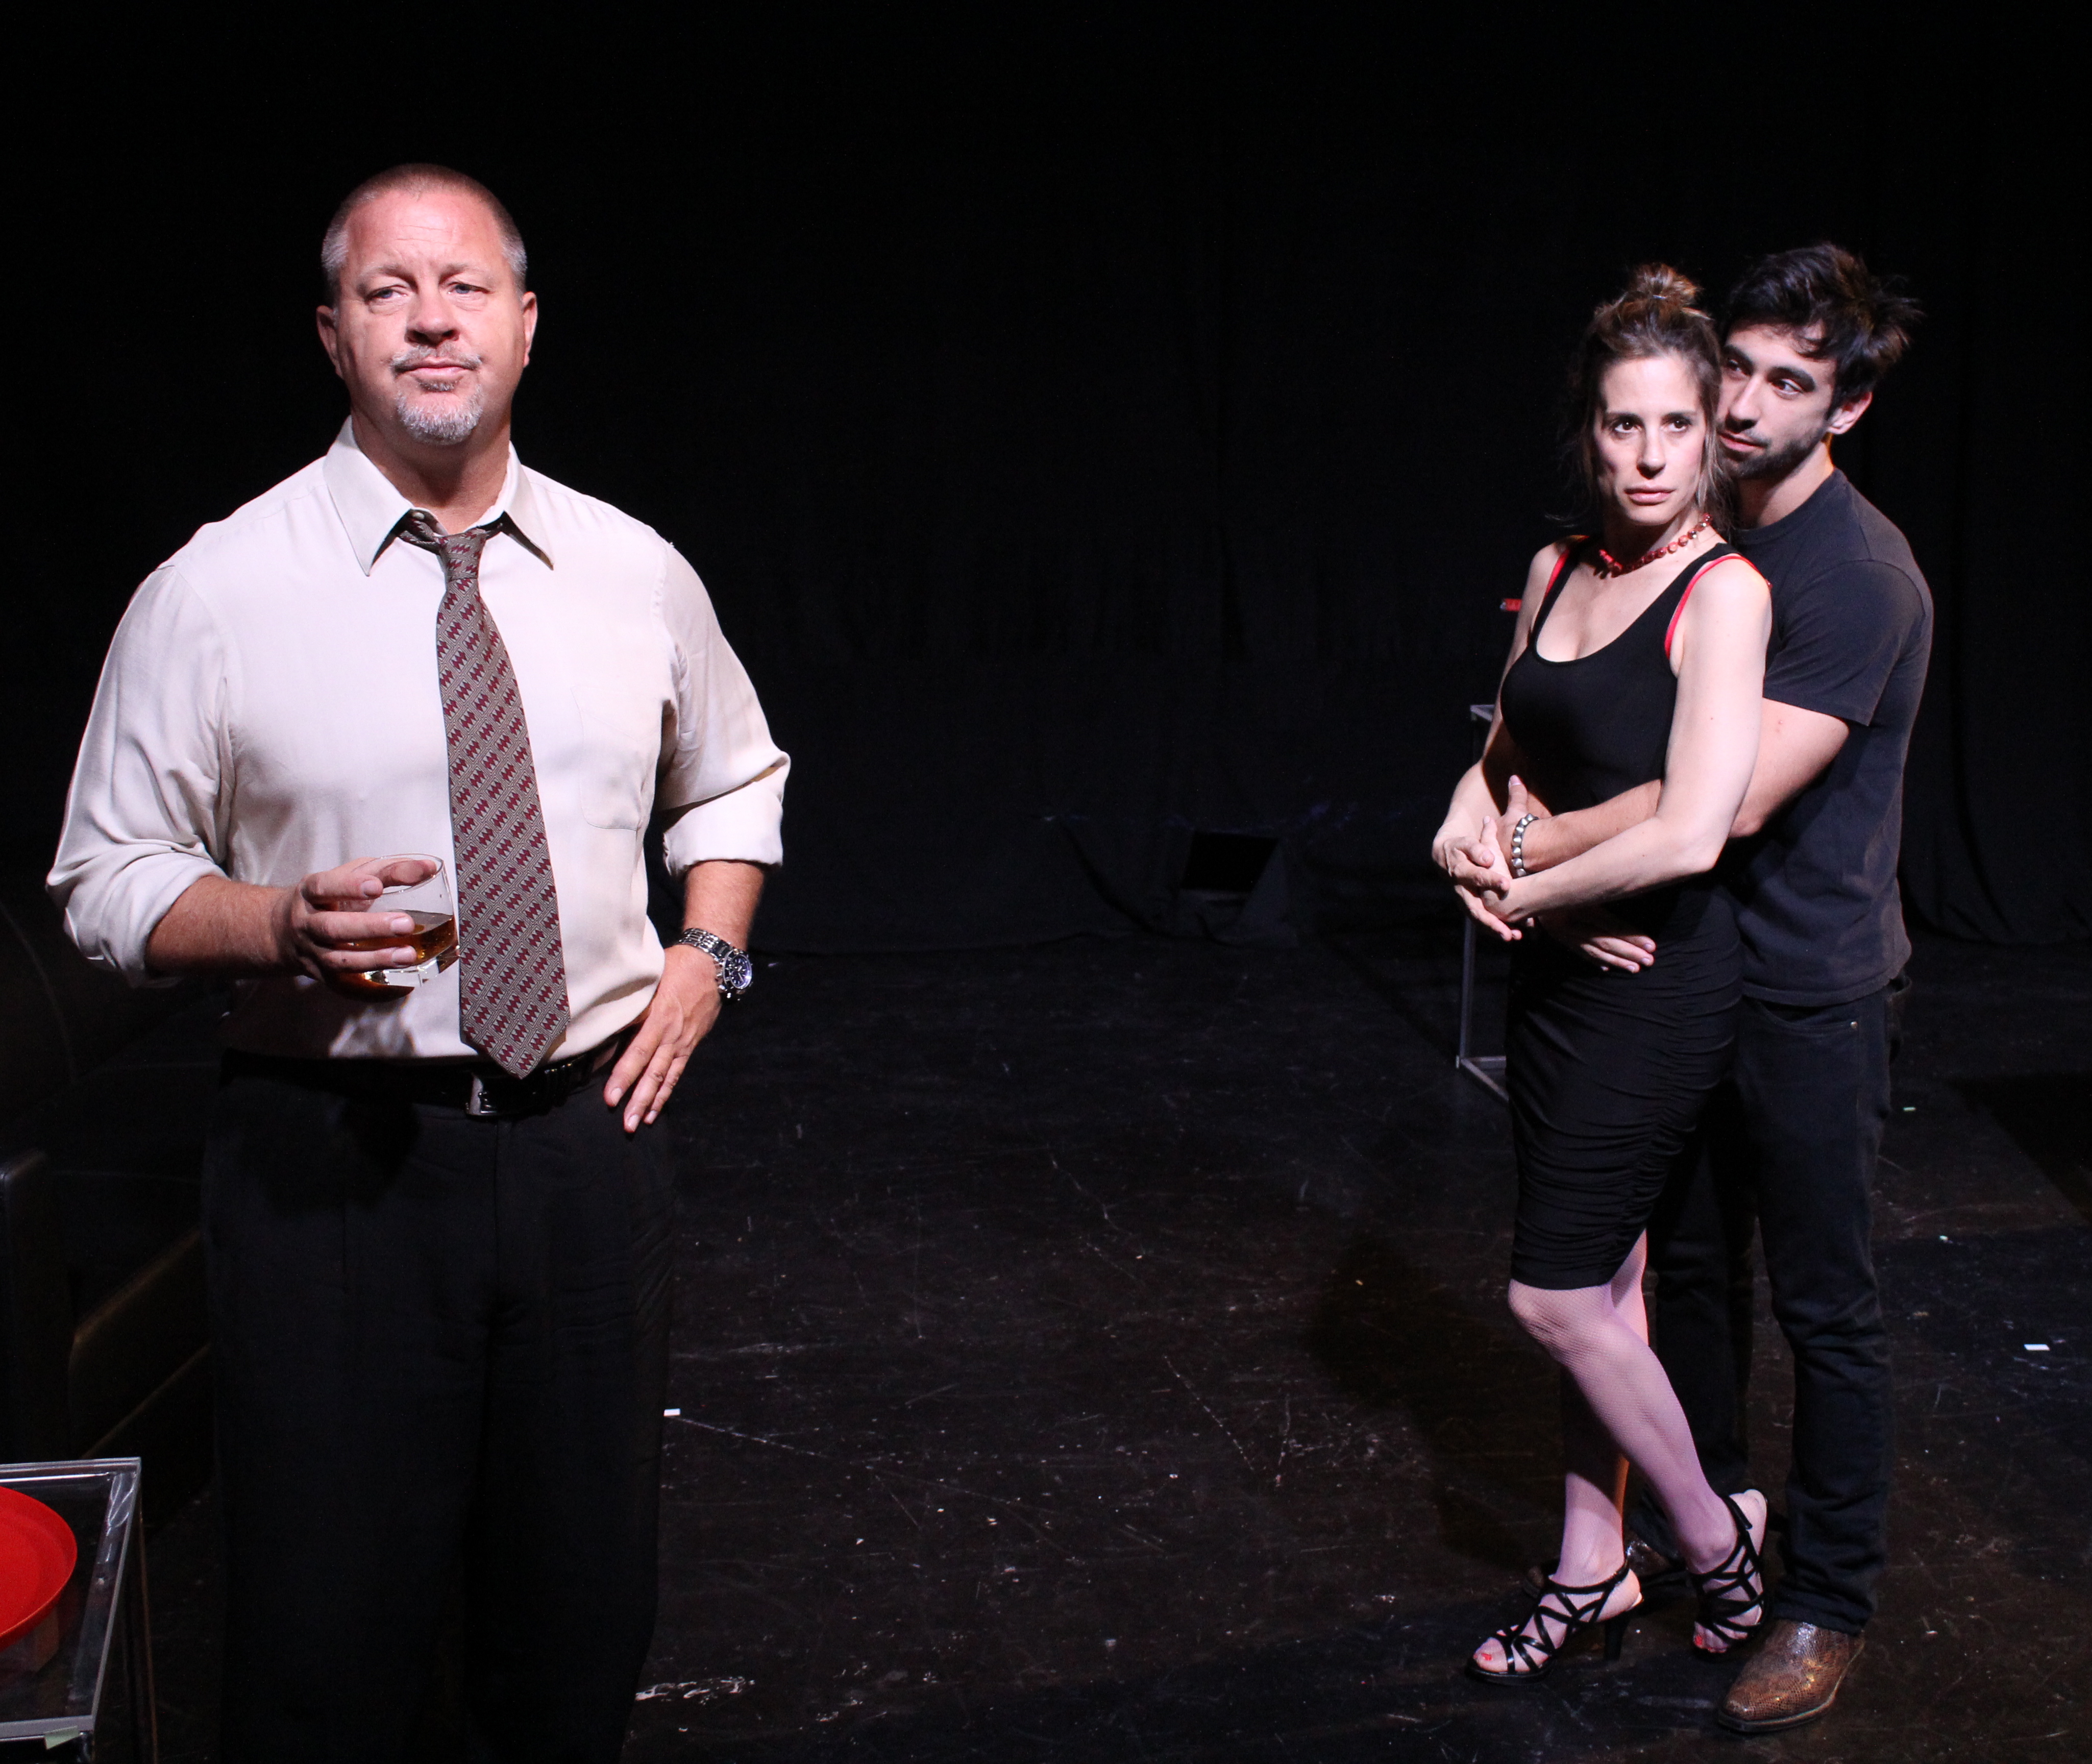 John Lacy, Elizabeth Greer, and Brad Culver in Guy Zimmerman's The Black Glass at the Open Fist Theatre.